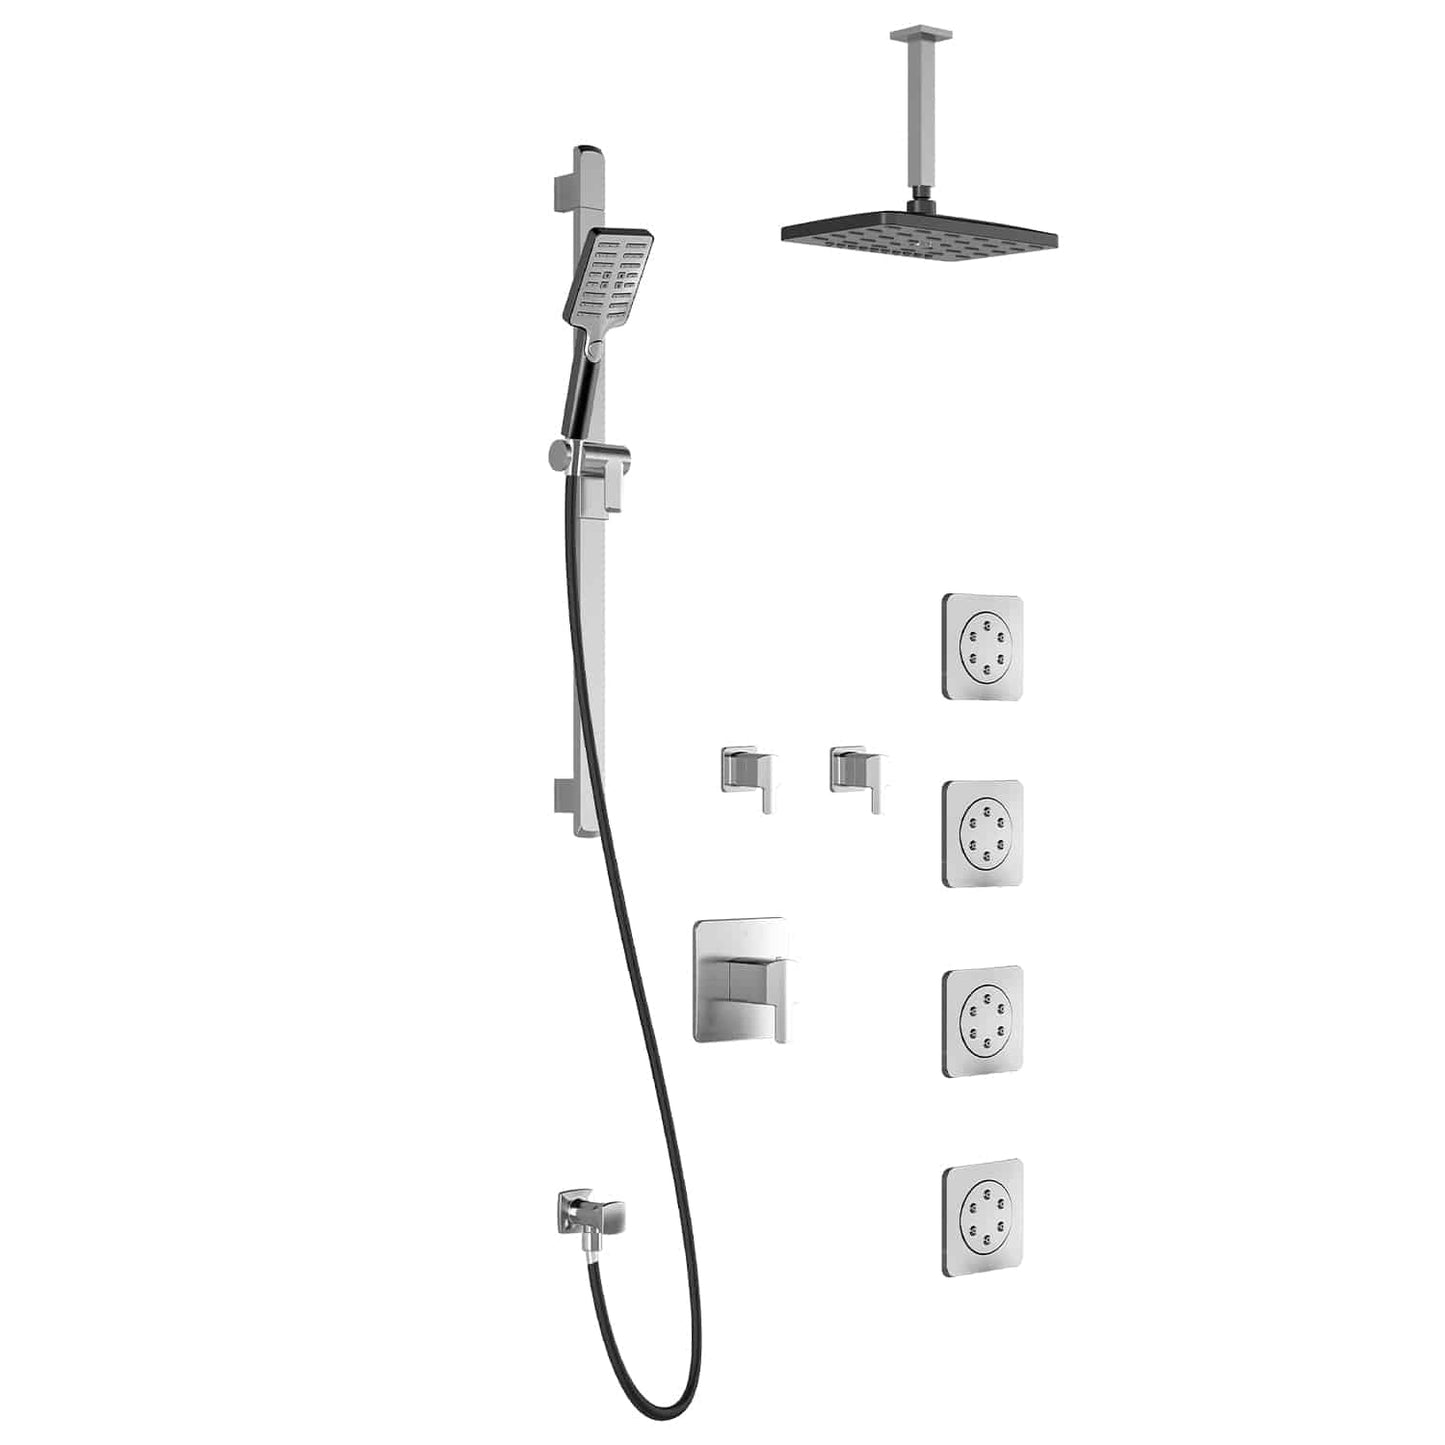 Kalia GRAFIK T375 PREMIA Thermostatic Shower Kit System with Vertical Ceiling Arm and 12" Rectangle Rain Shower Head- Chrome/Black